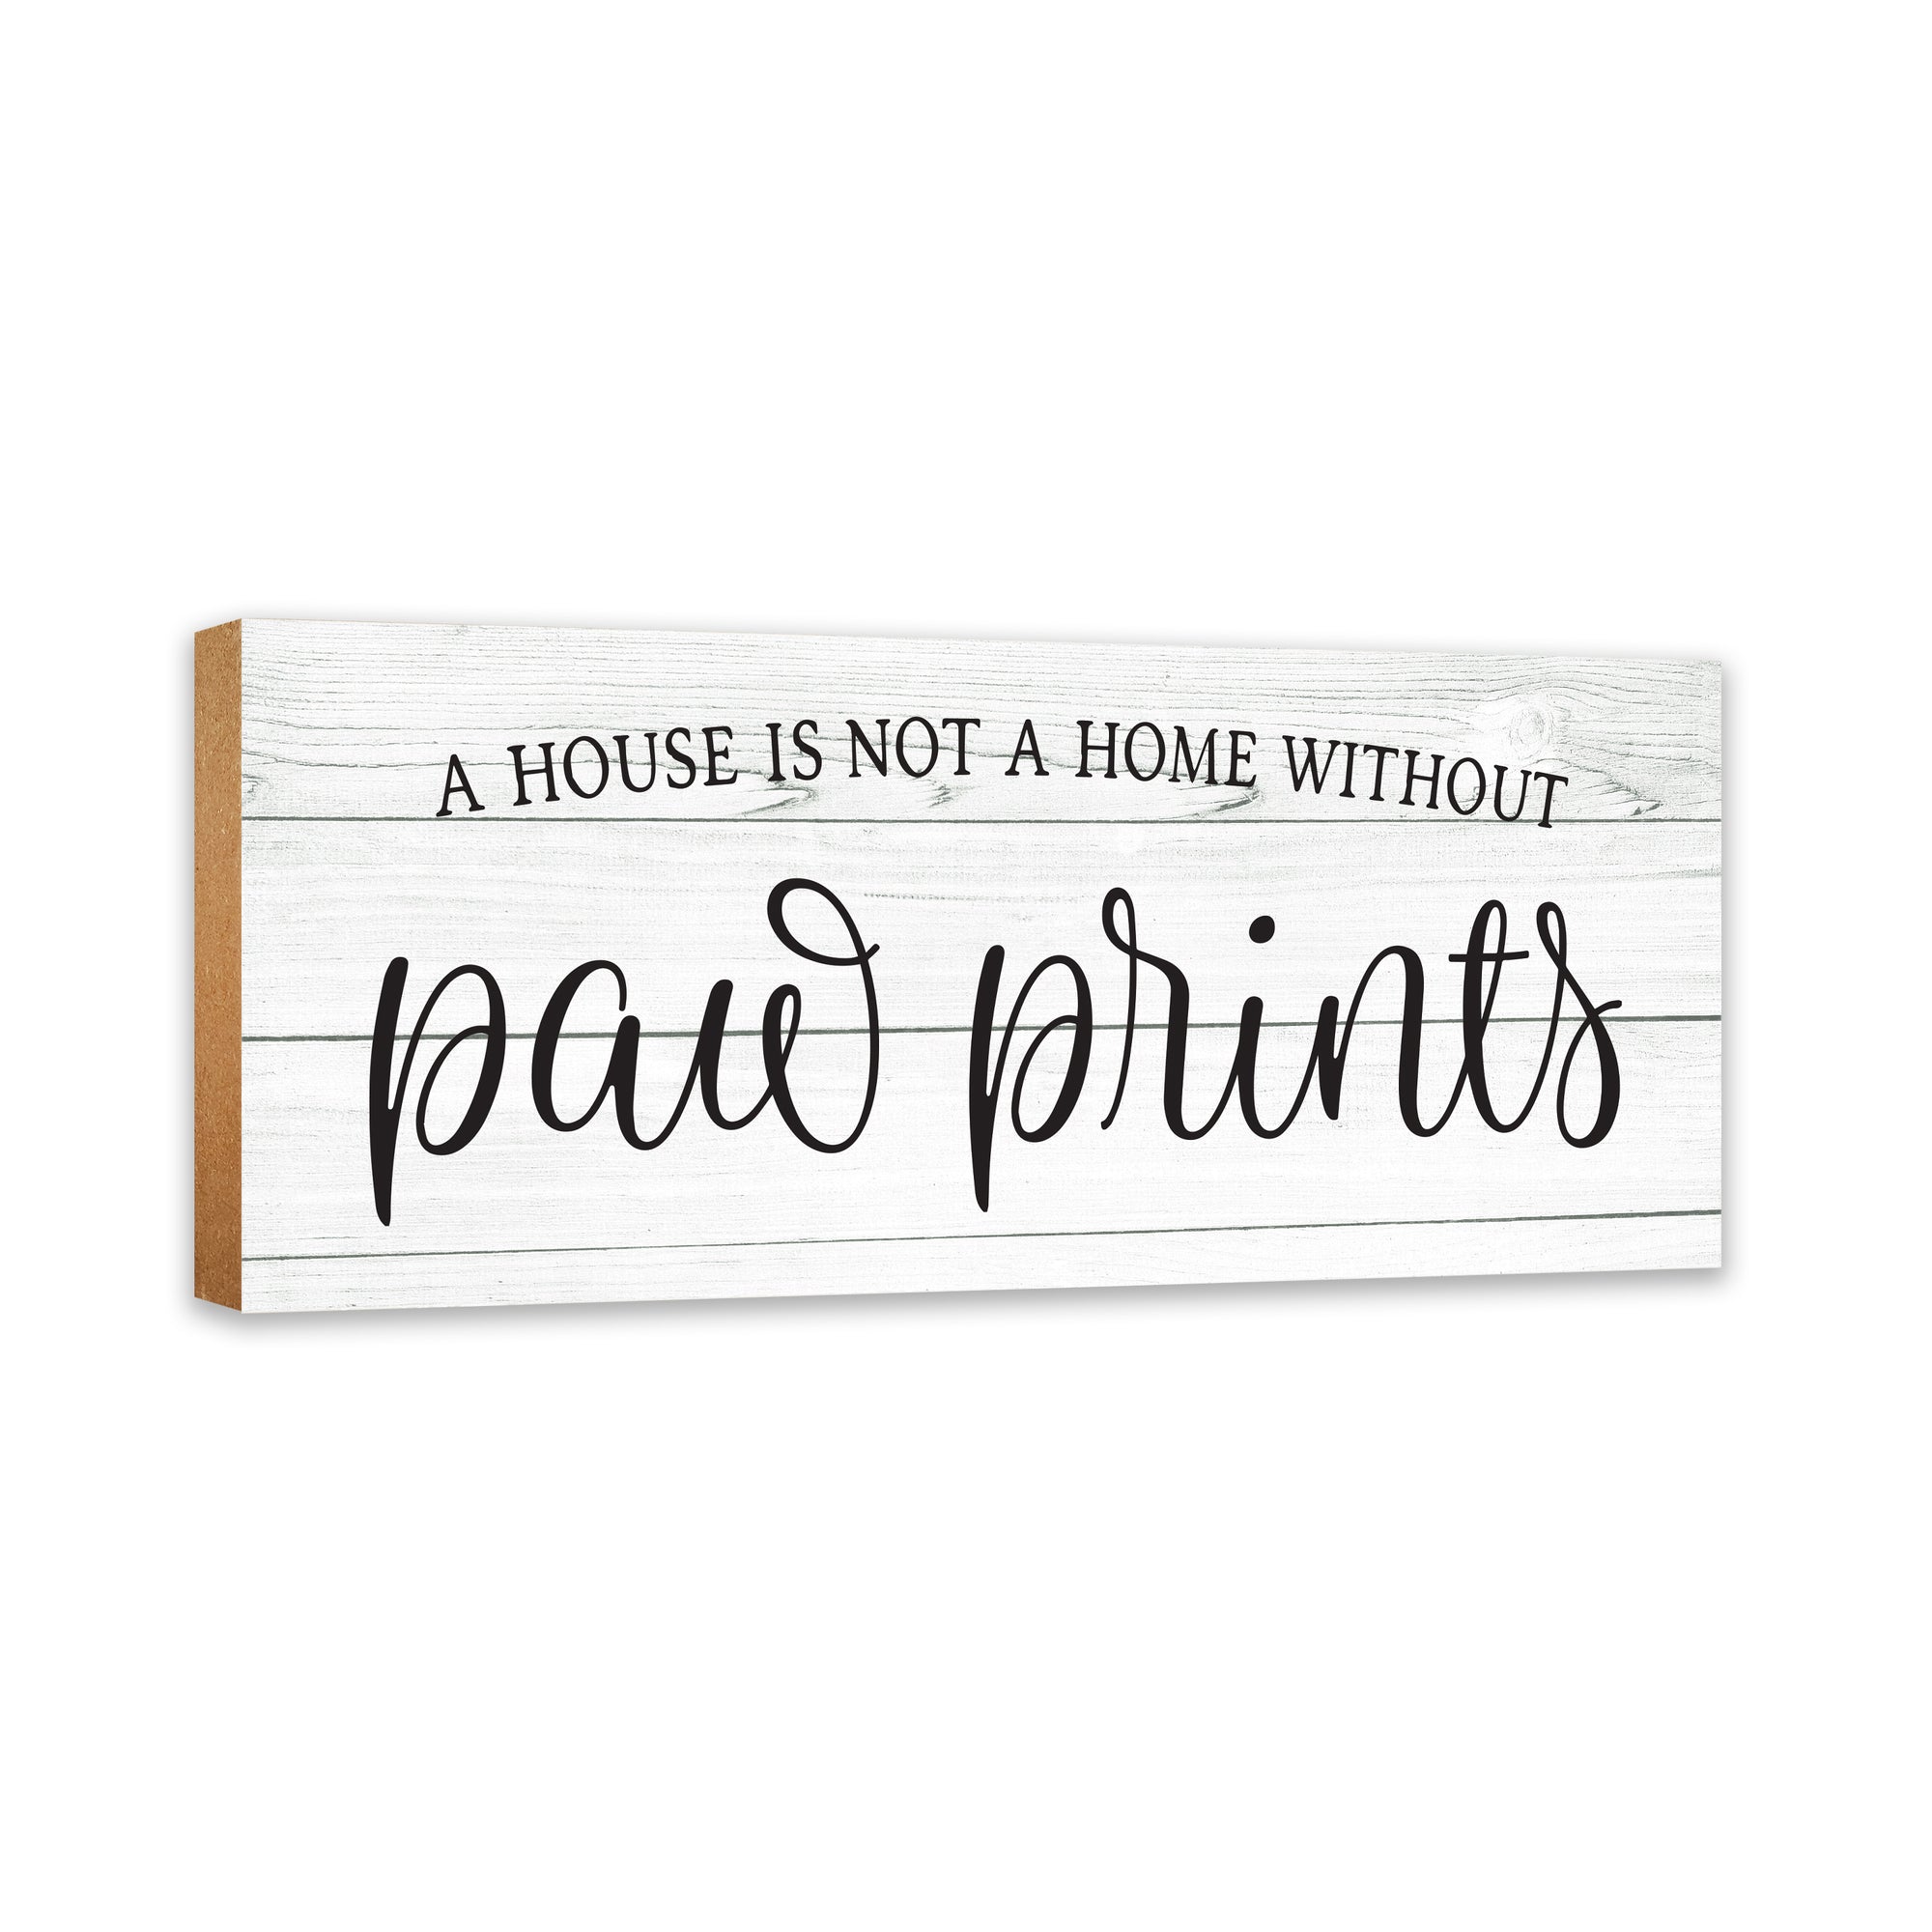 Motivational tabletop decorations for home: A set of wooden signs with motivational messages to brighten your living area.